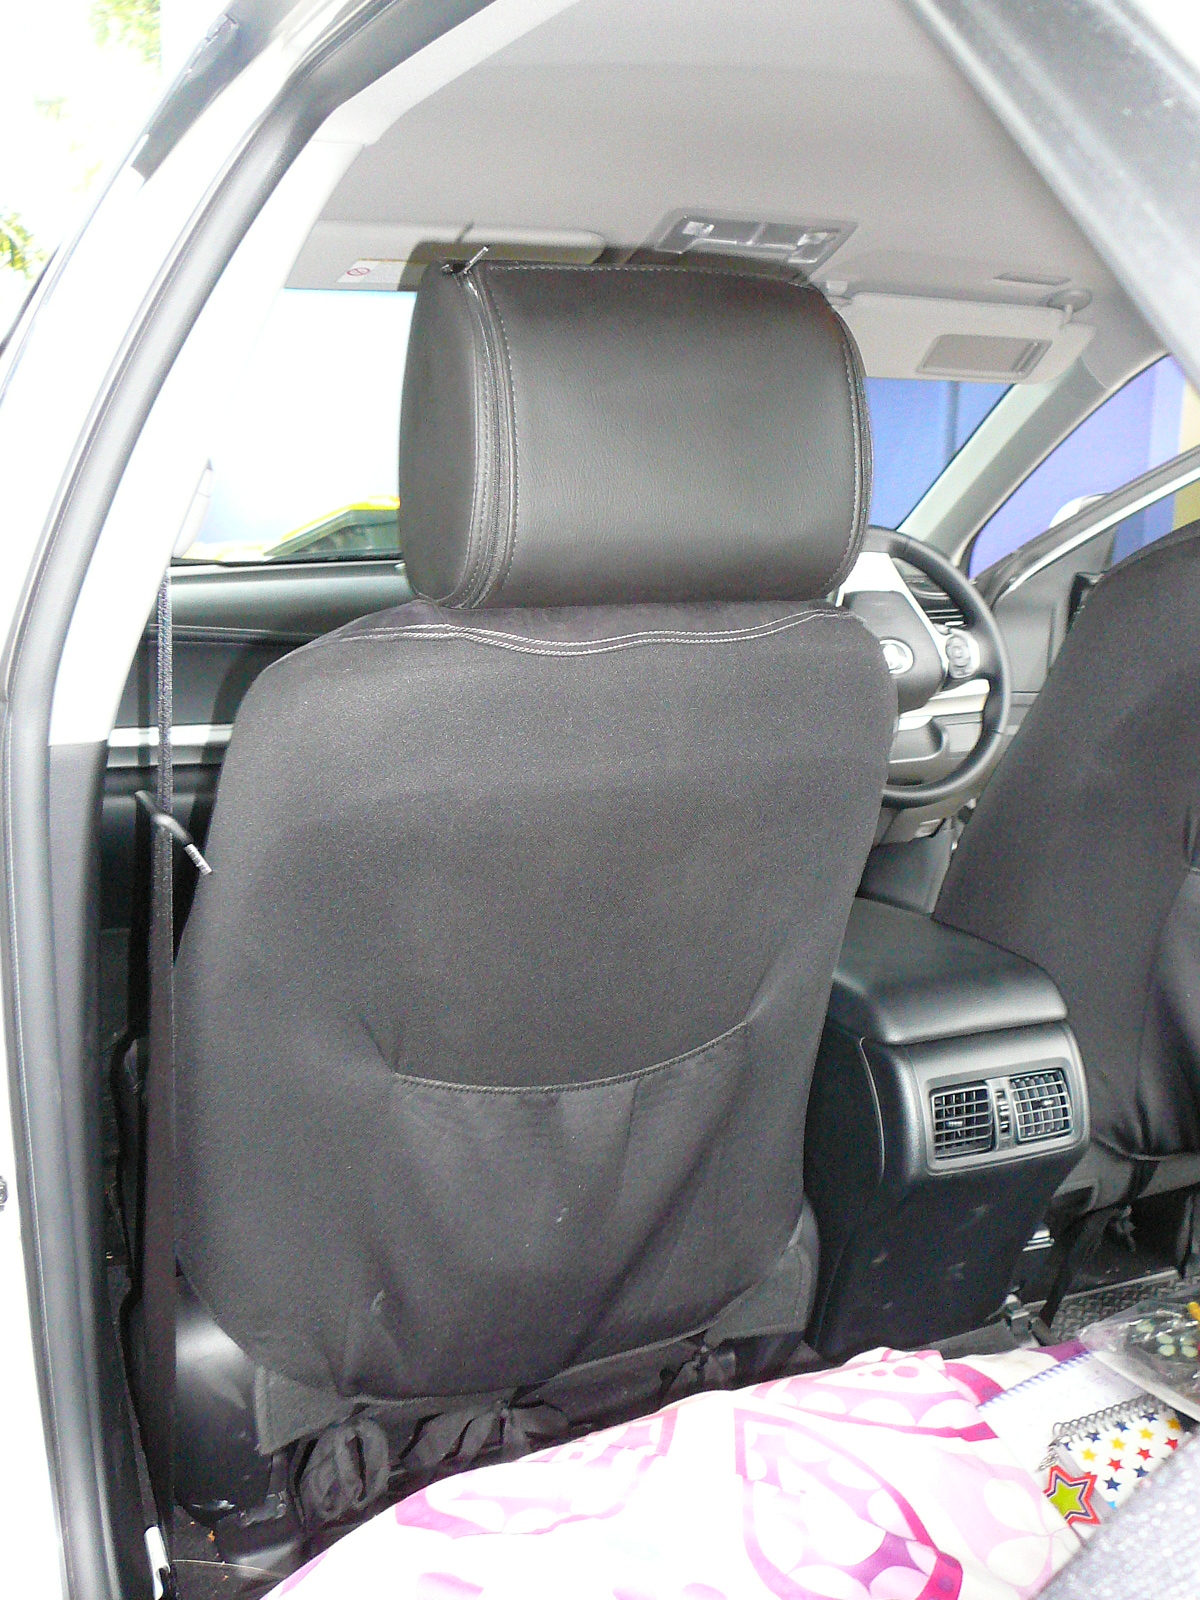 Toyota Camry 2013, Axis 9 inch DVD Headrest Screens